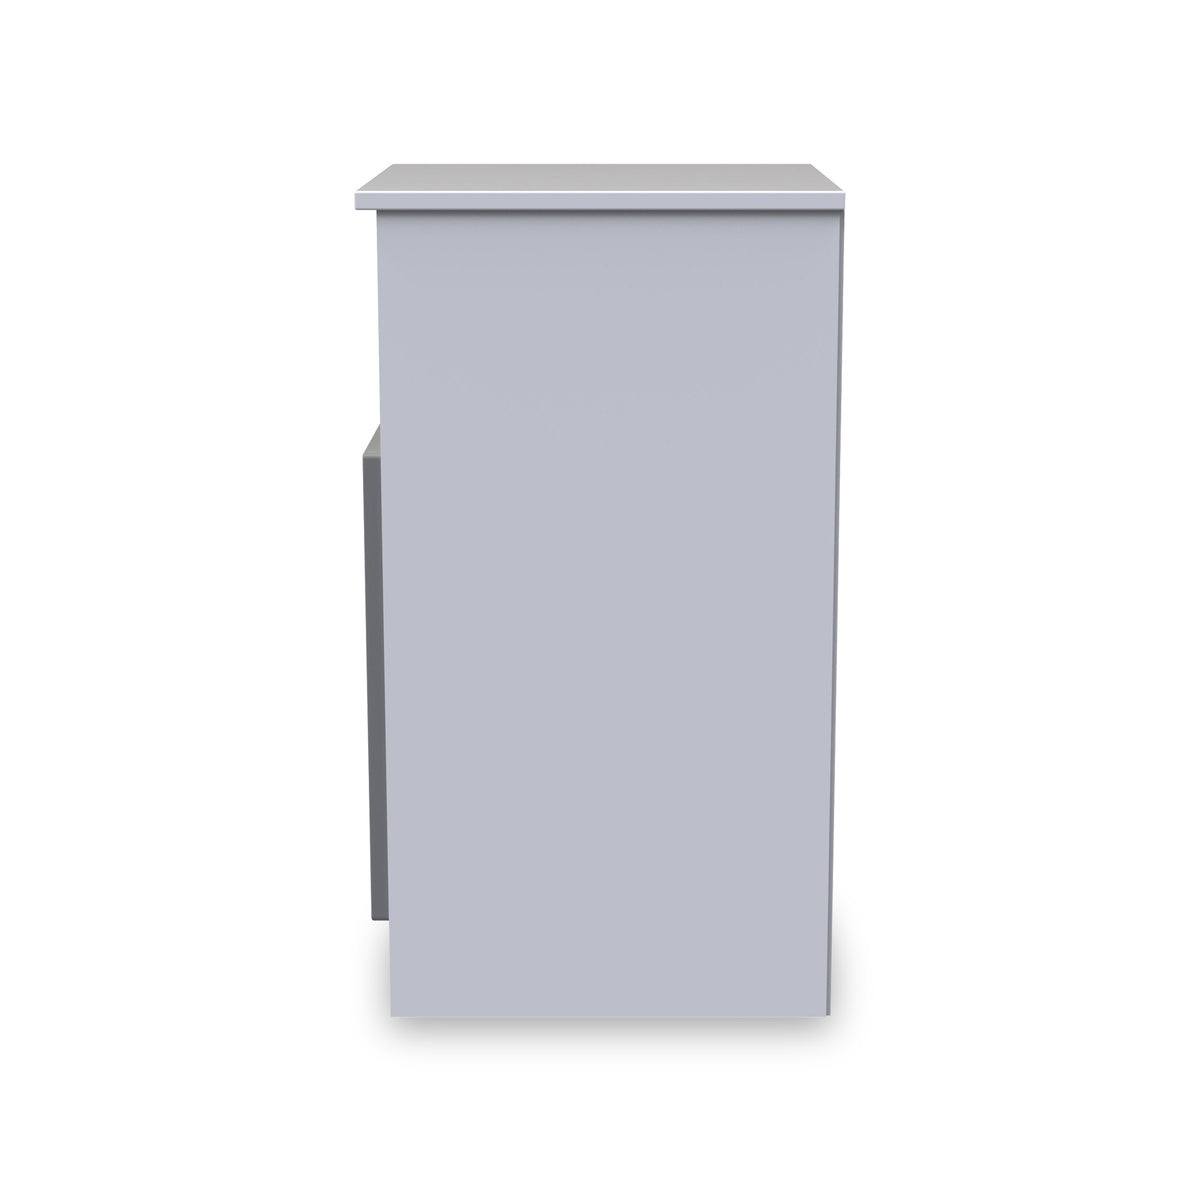 Blakely Grey and White 1 Door with Open Shelf Bedside Cabinet